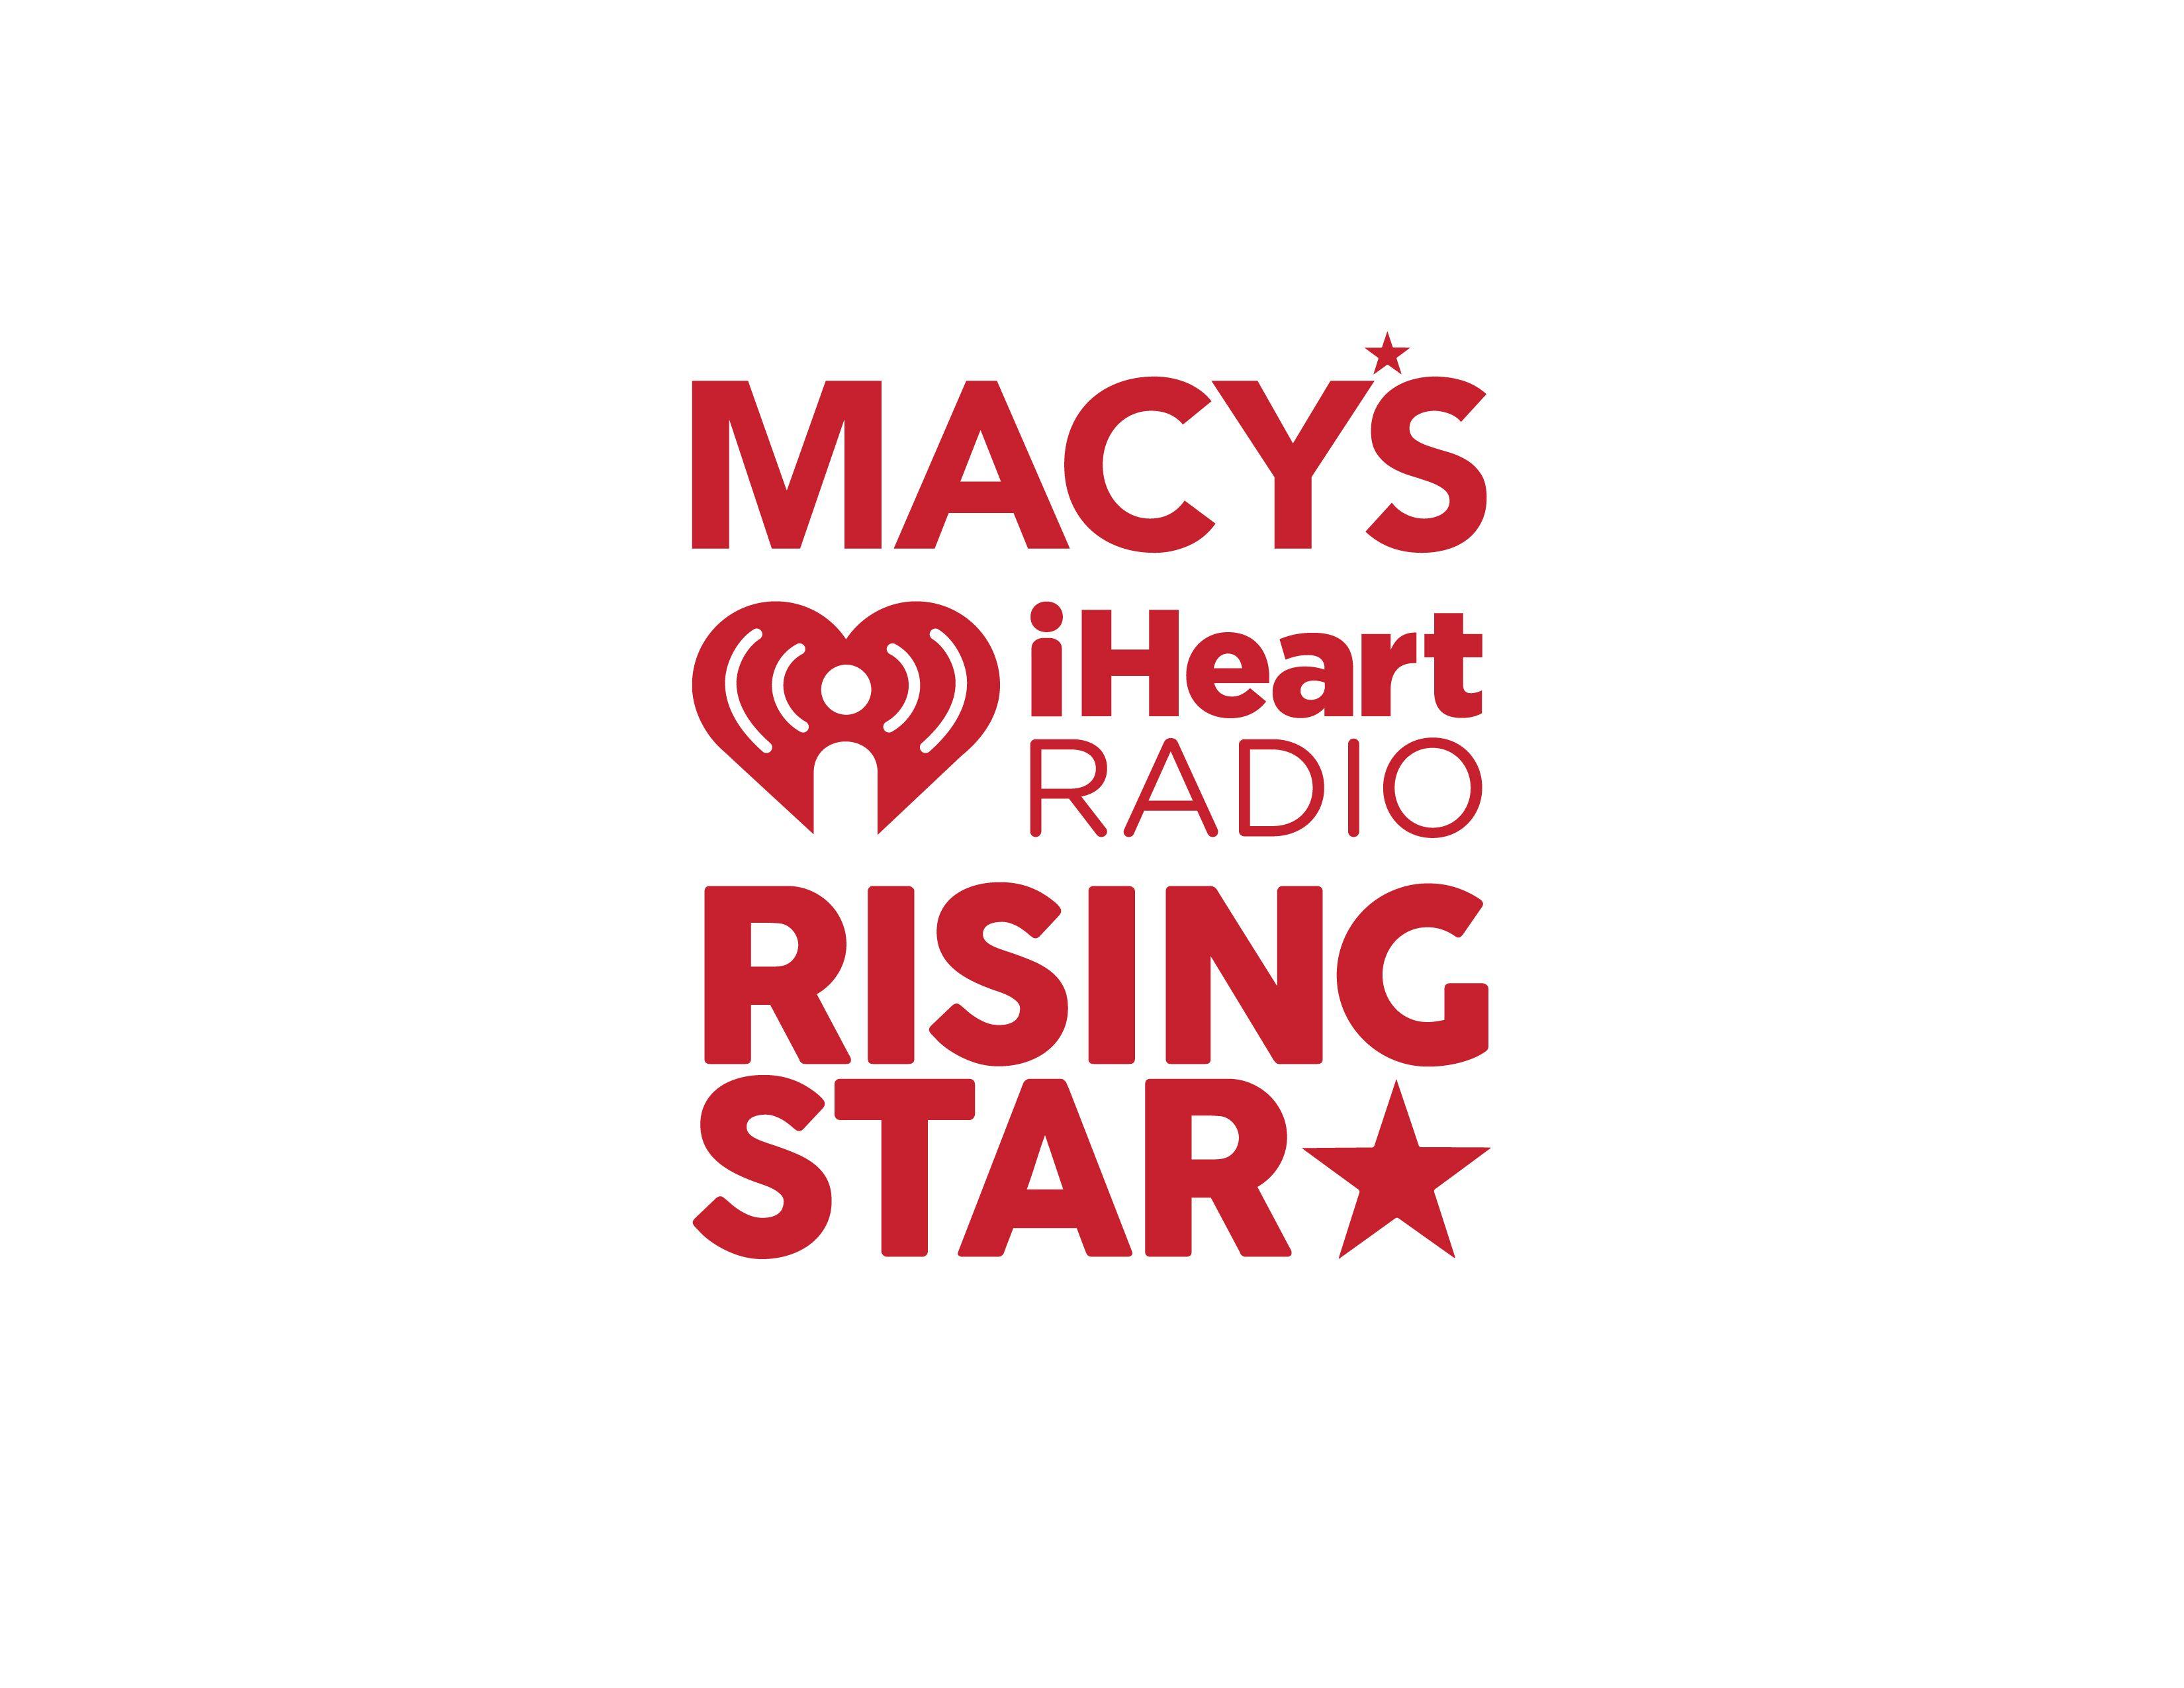 Macy's Red Star Logo - iHeartRadio Music Festival and Festival Village Return to MGM